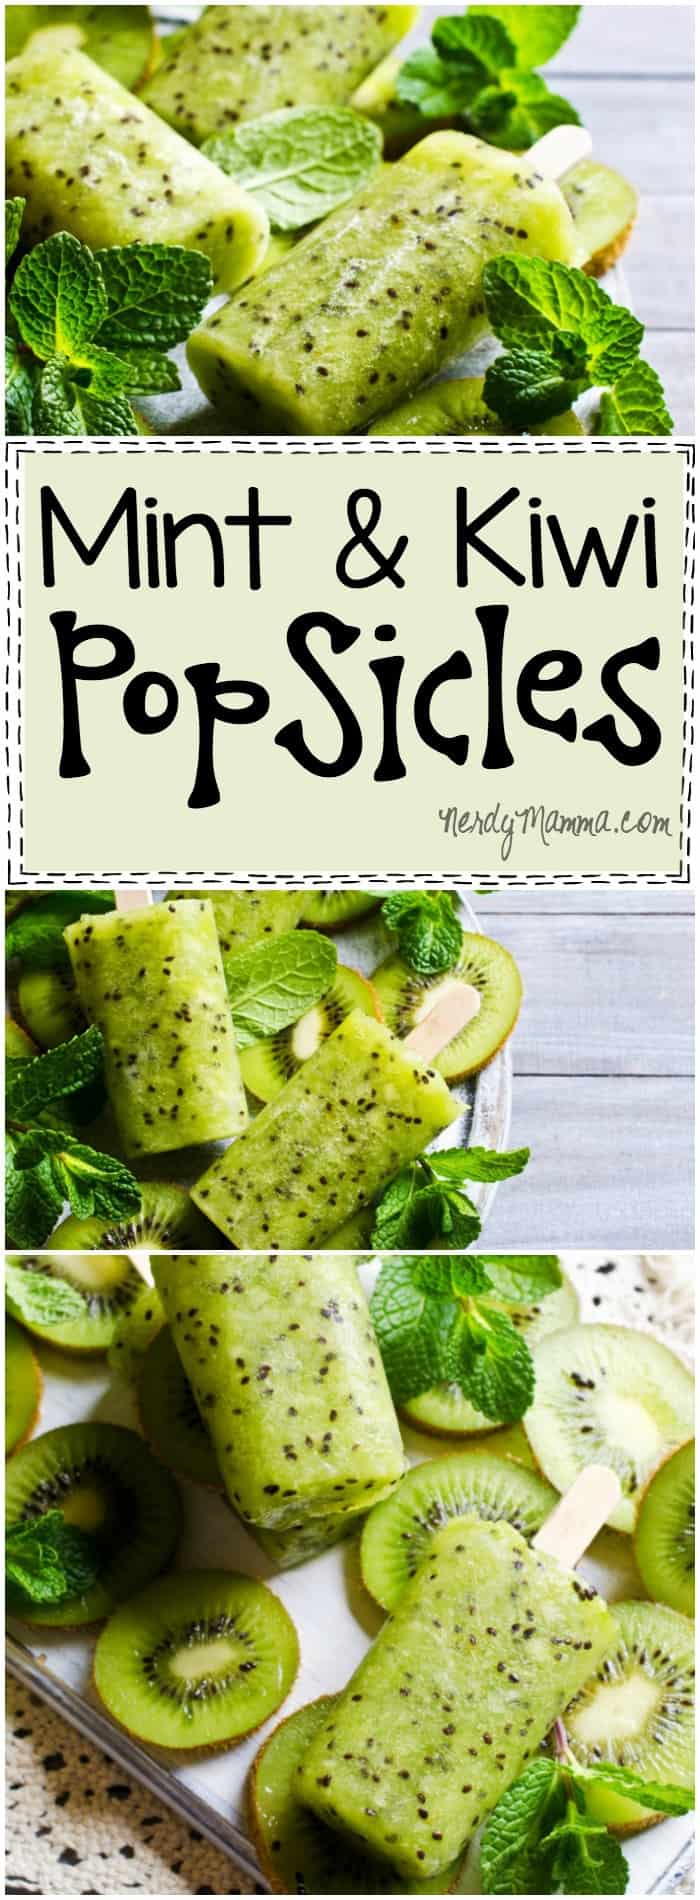 I love this easy recipe for these Mint and Kiwi Popsicles. I mean, I never thought of combining those two! So yummy sounding!